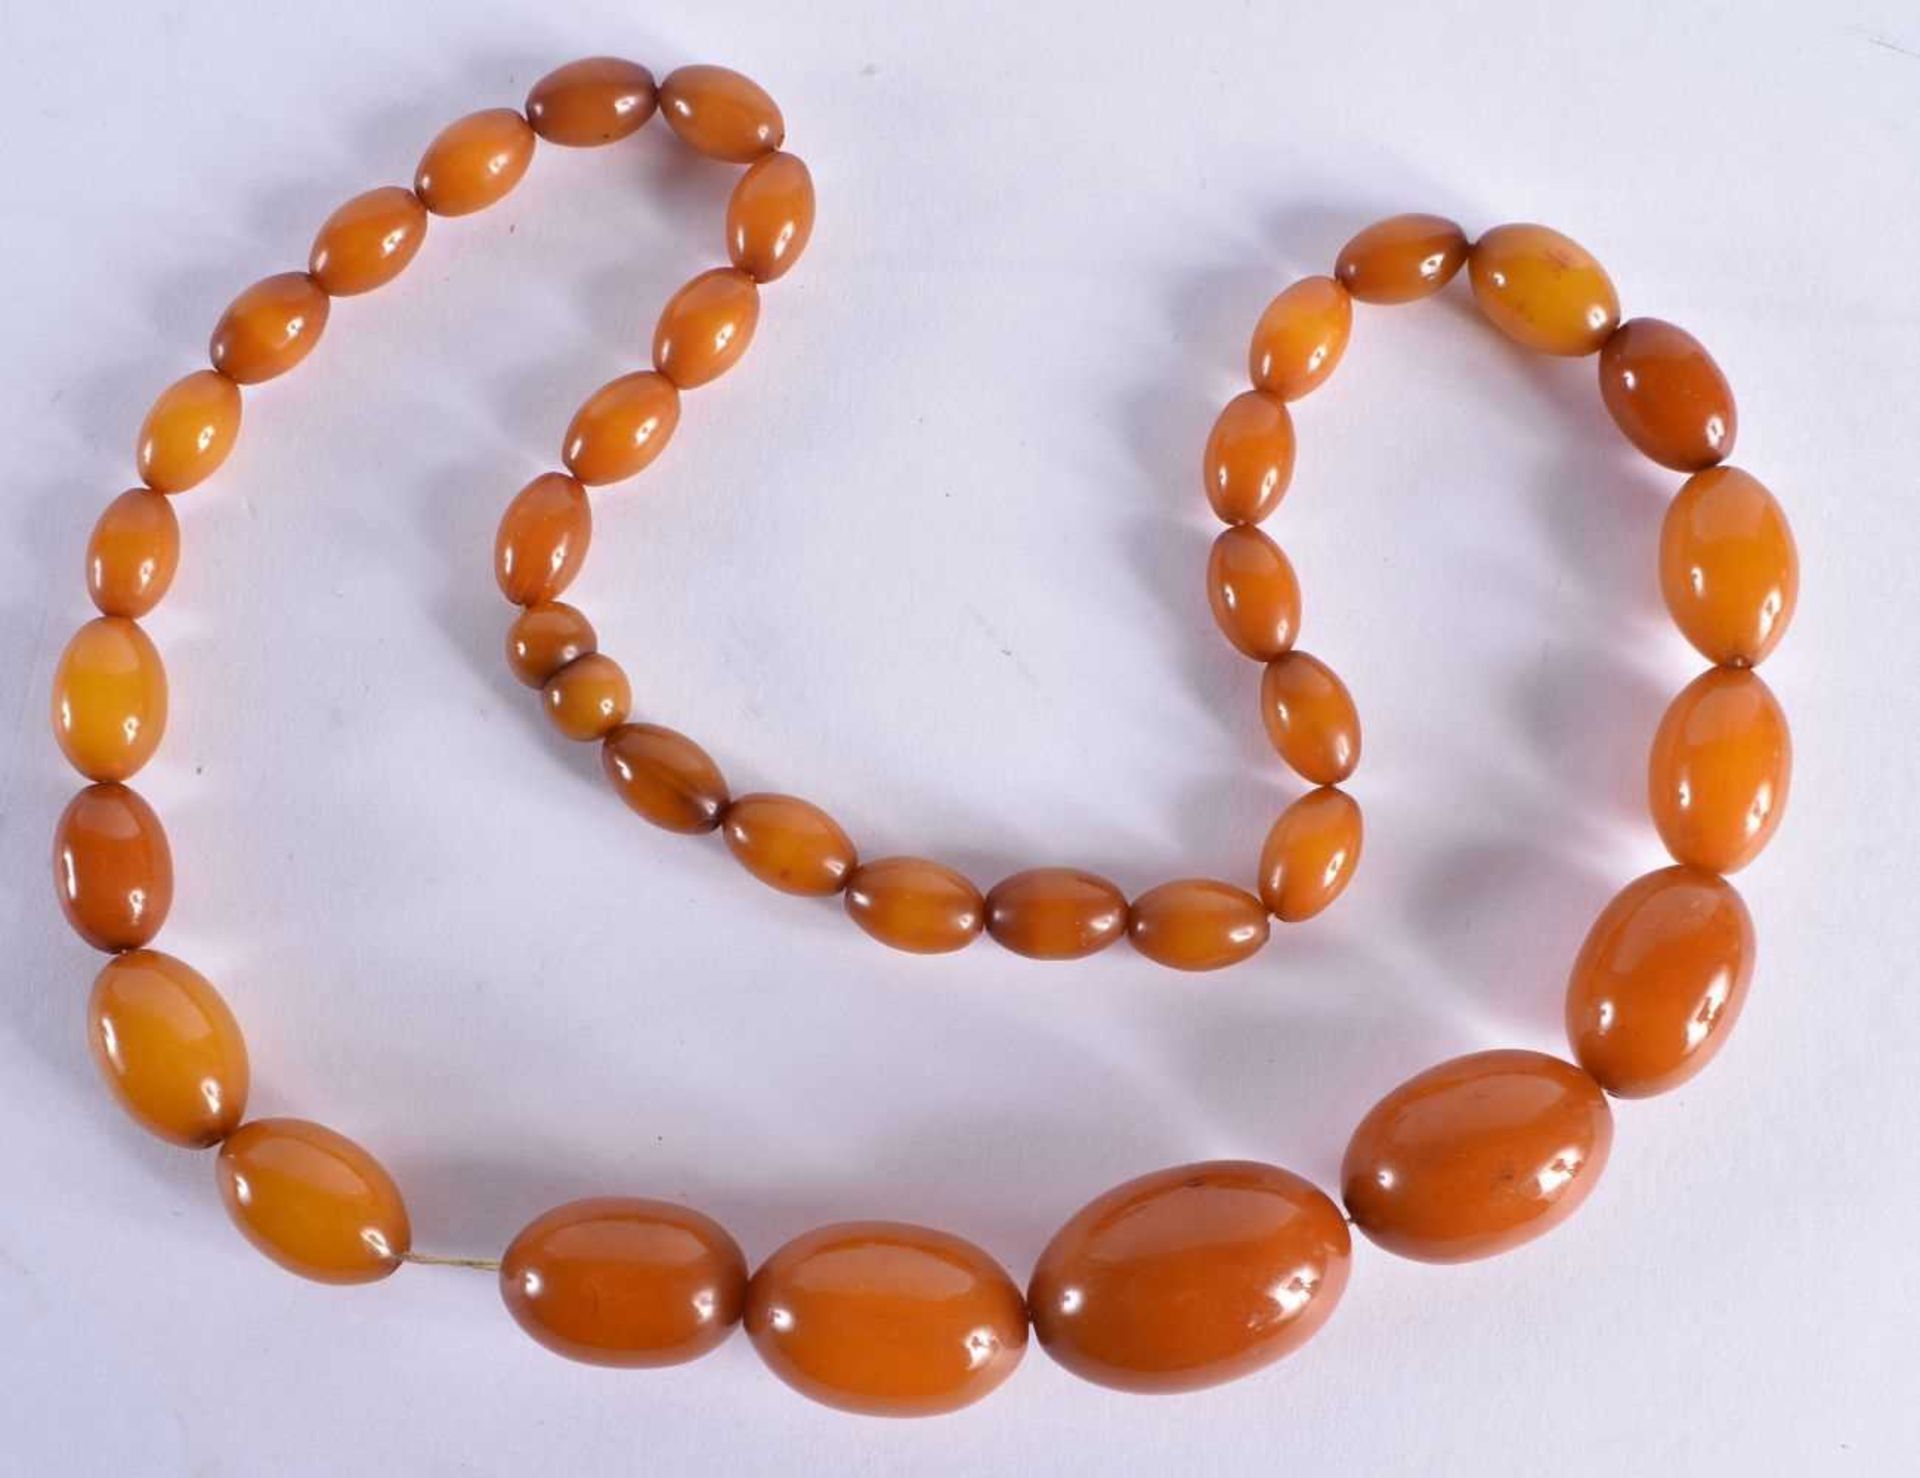 AN EARLY 20TH CENTURY CARVED BUTTERSCOTCH AMBER NECKLACE. 39 grams. 50 cm long, largest bead 2.75 cm